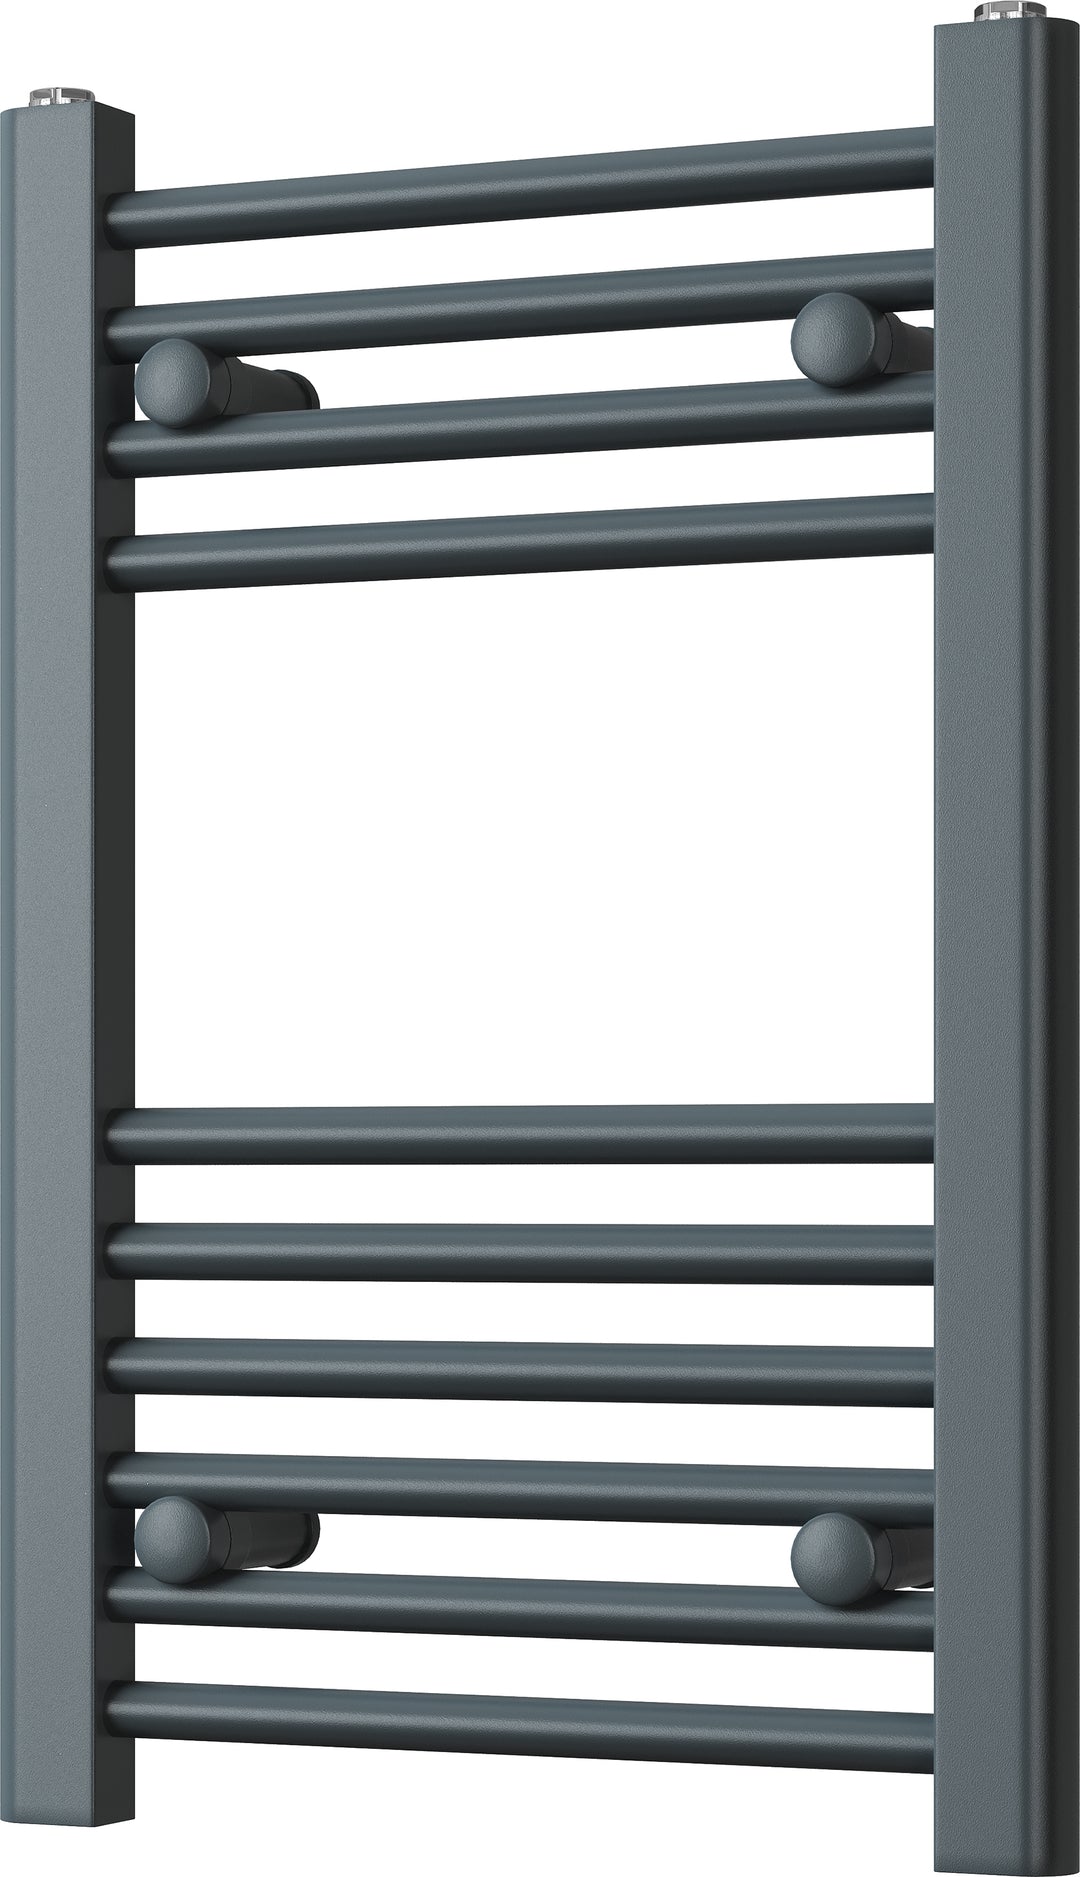 Zennor - Anthracite Heated Towel Rail - H600mm x W400mm - Straight